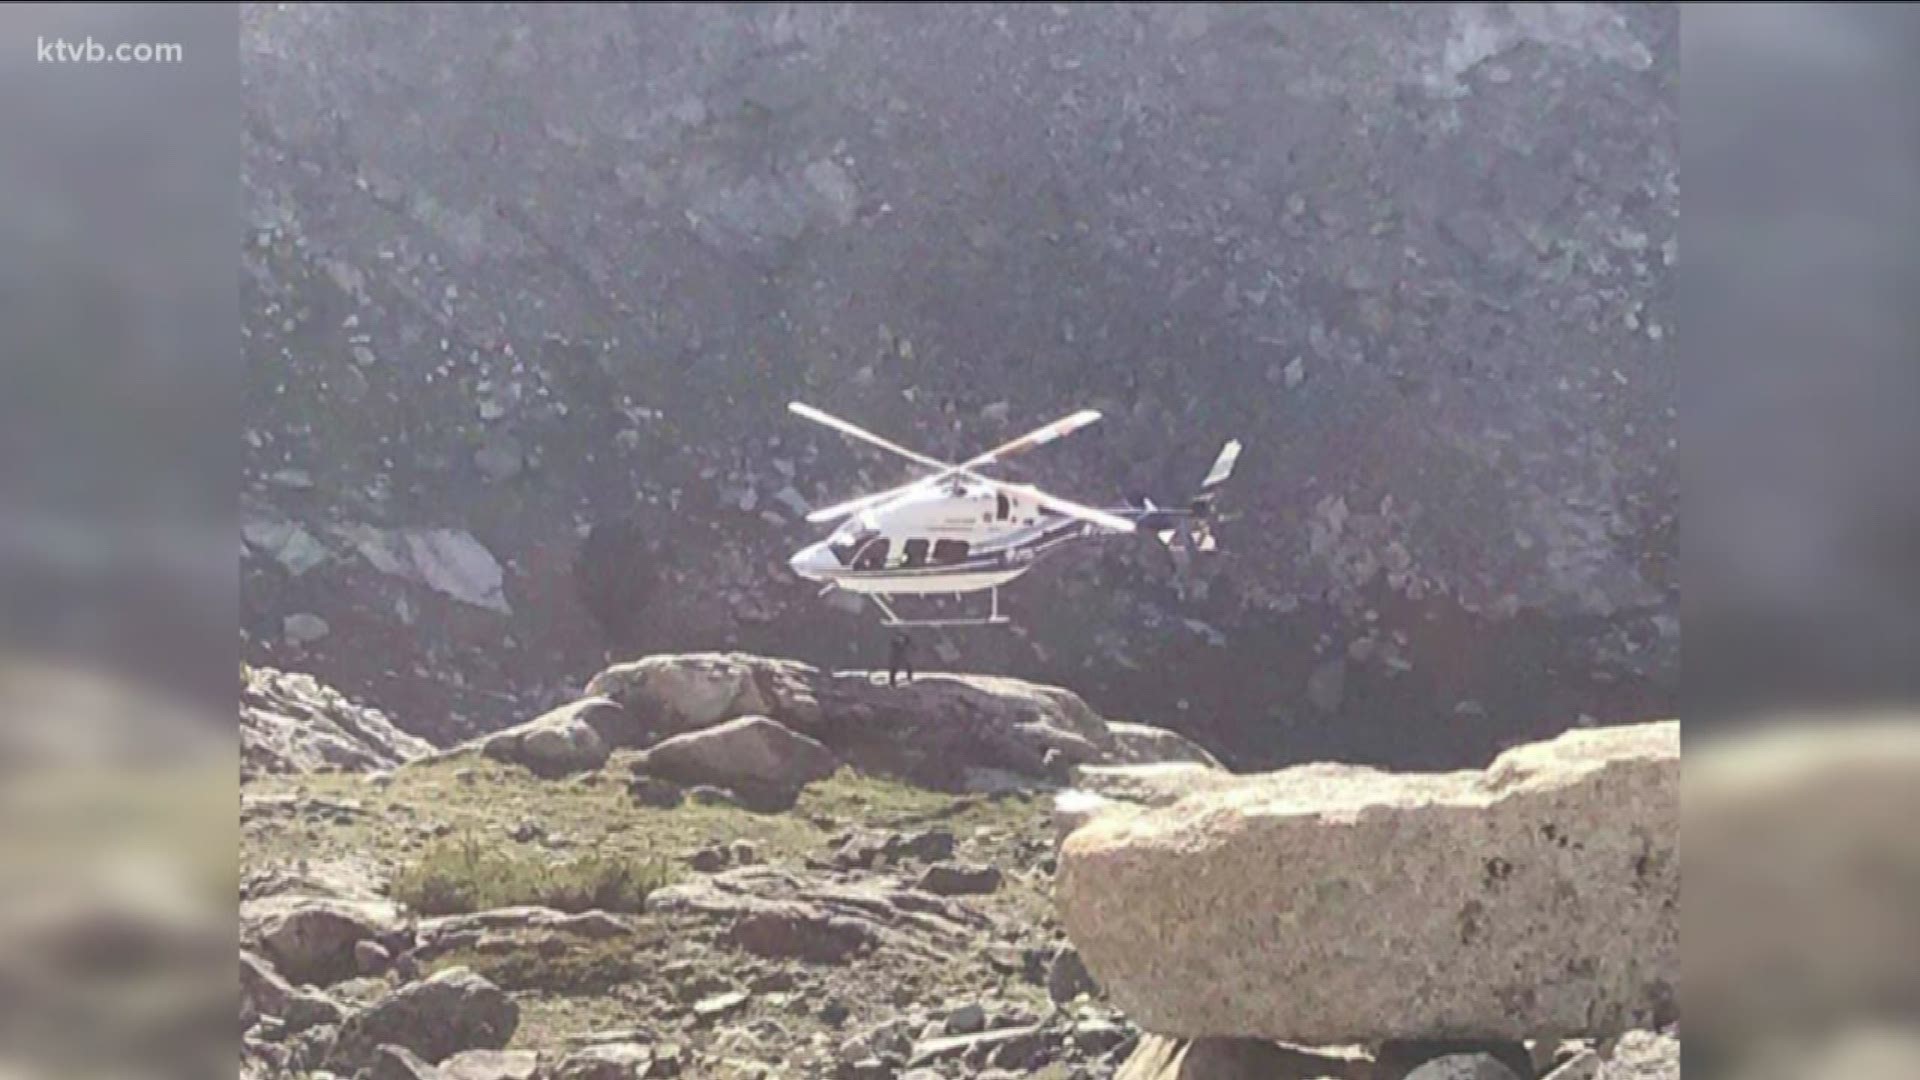 A St. Luke's crew pulled off a daring mountainside rescue in the Magic Valley on Thursday and got an injured hiker to safety. The hiker had fallen 40 feet down a cliff in a remote part of a central Idaho mountainside and the steep terrain made it impossible for the helicopter to safely land.